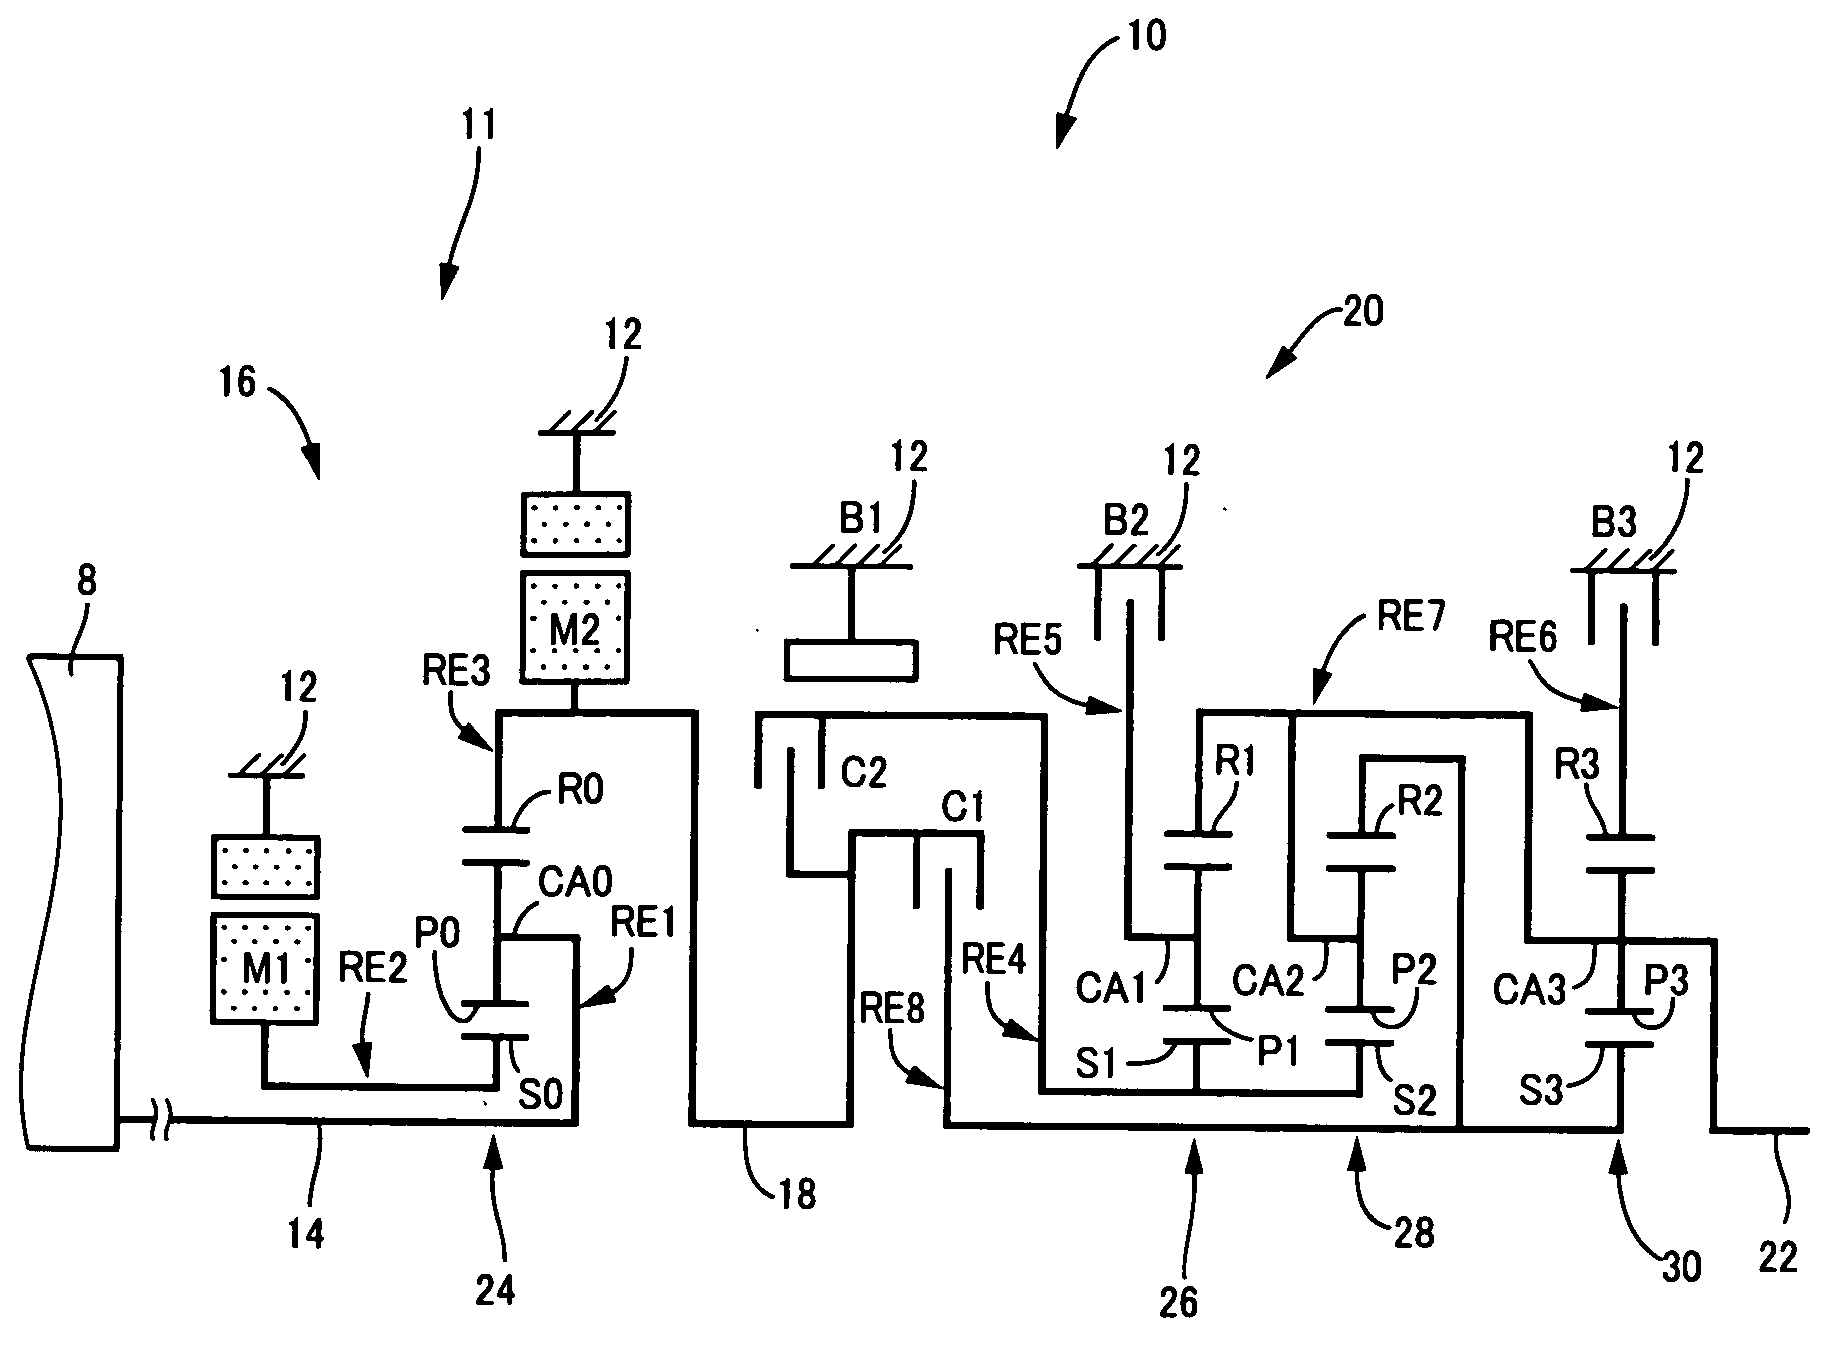 Control apparatus for vehicular power transmitting system